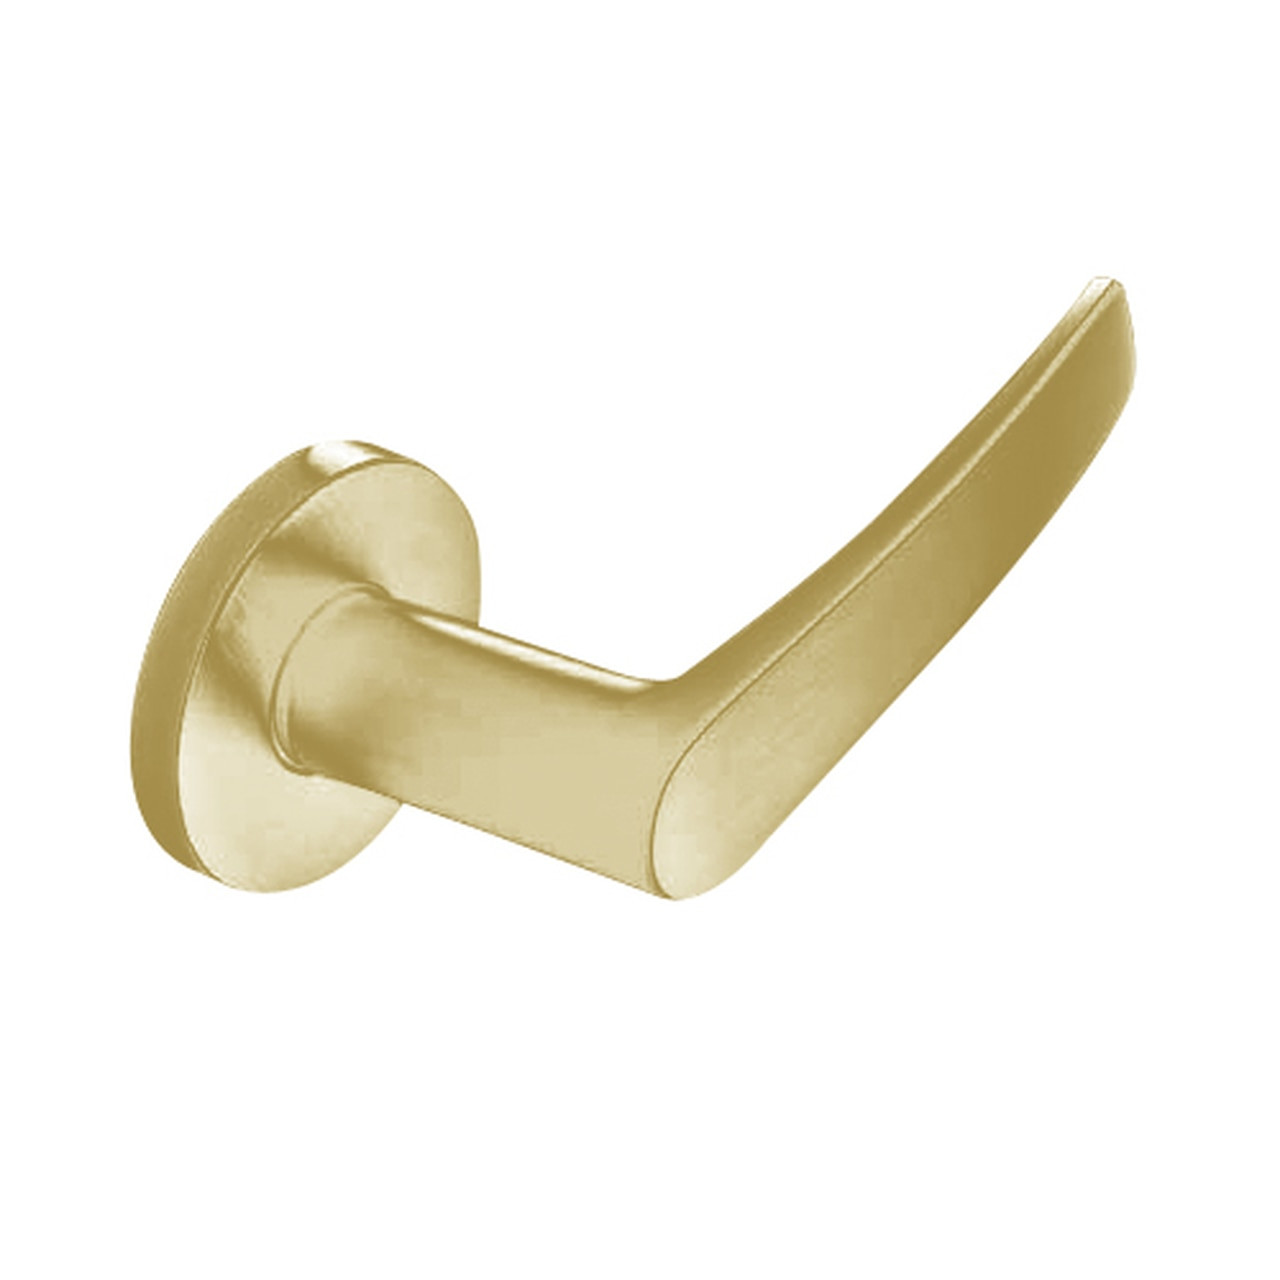 ML2057-ASB-606-CL6 Corbin Russwin ML2000 Series IC 6-Pin Less Core Mortise Storeroom Locksets with Armstrong Lever in Satin Brass